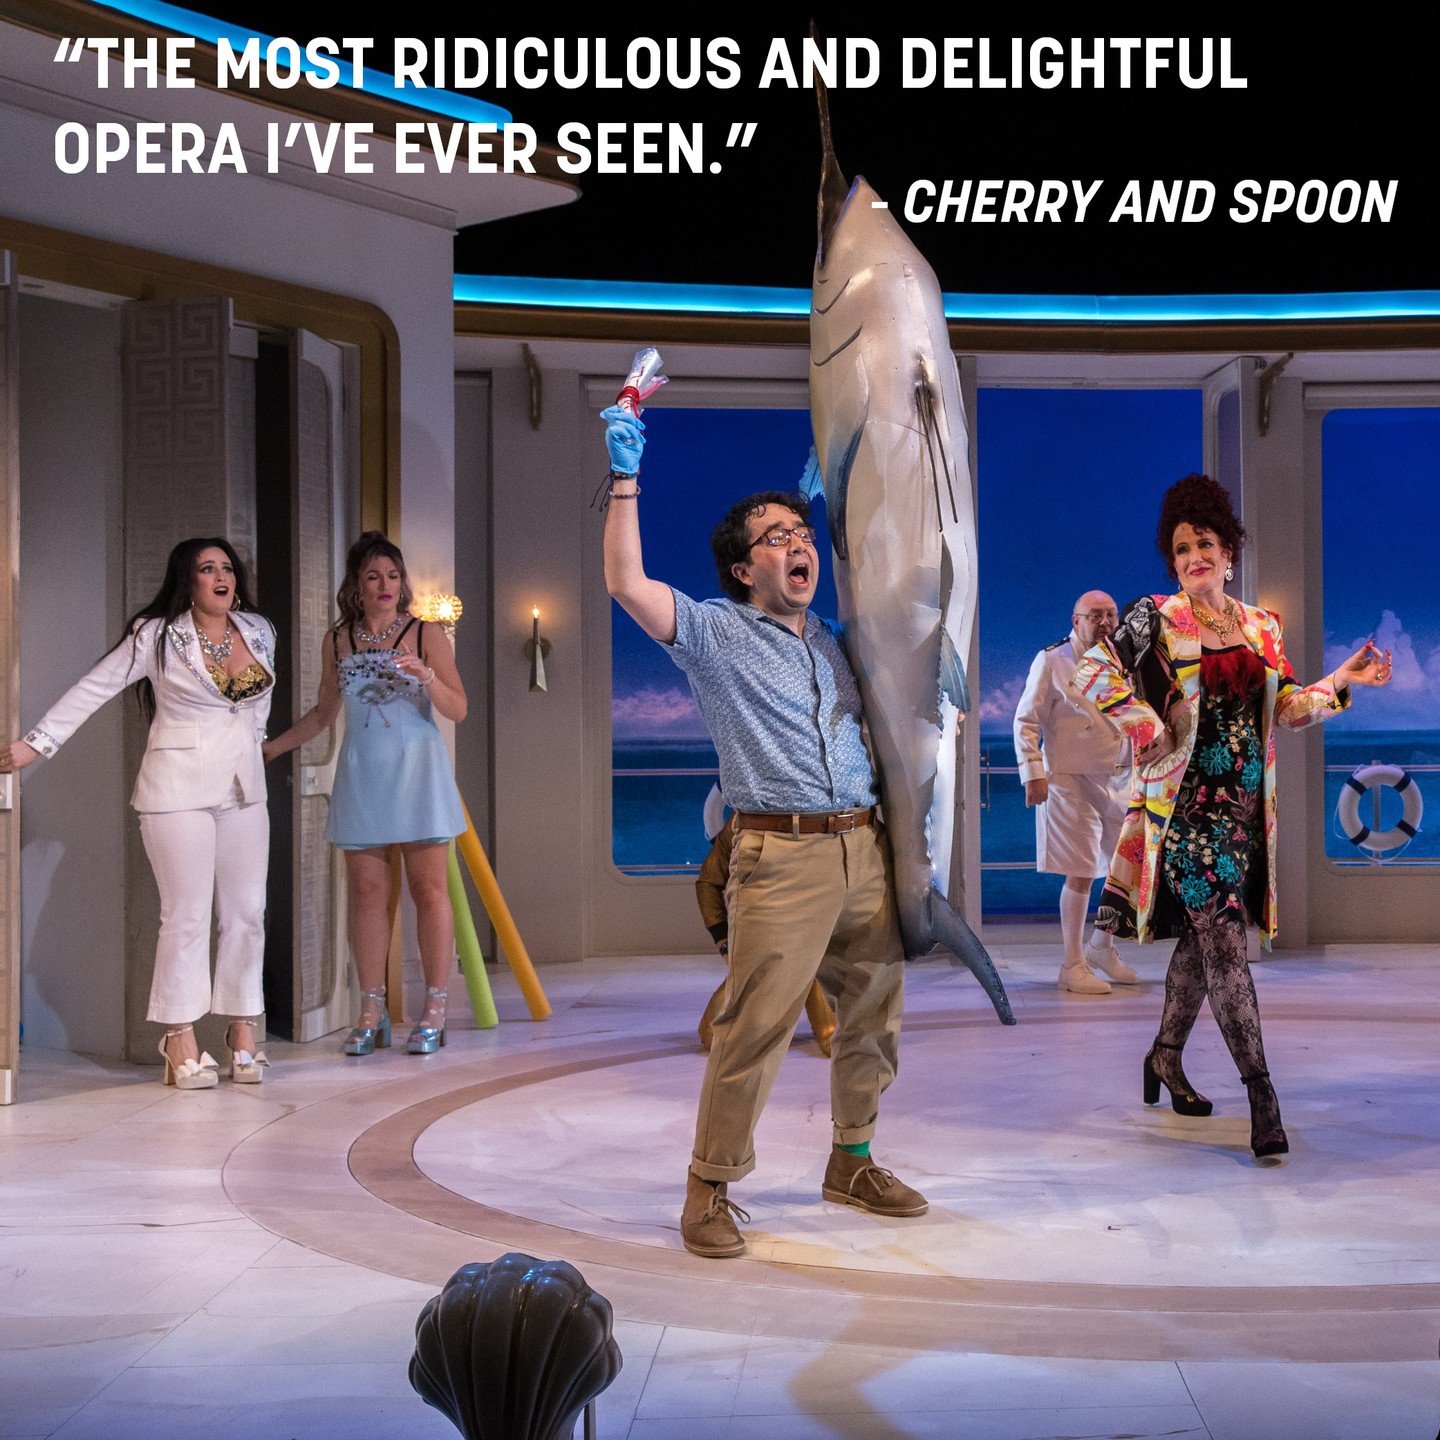 &quot;It's a 100-minute wild romp of an opera...if you like music, comedy, and creativity - you definitely should [see it].&quot;

Read Jill Schafer's review of JOHNNY SKEEKY; OR, THE REMEDY FOR EVERYTHING for Cherry and Spoon and get your tickets th